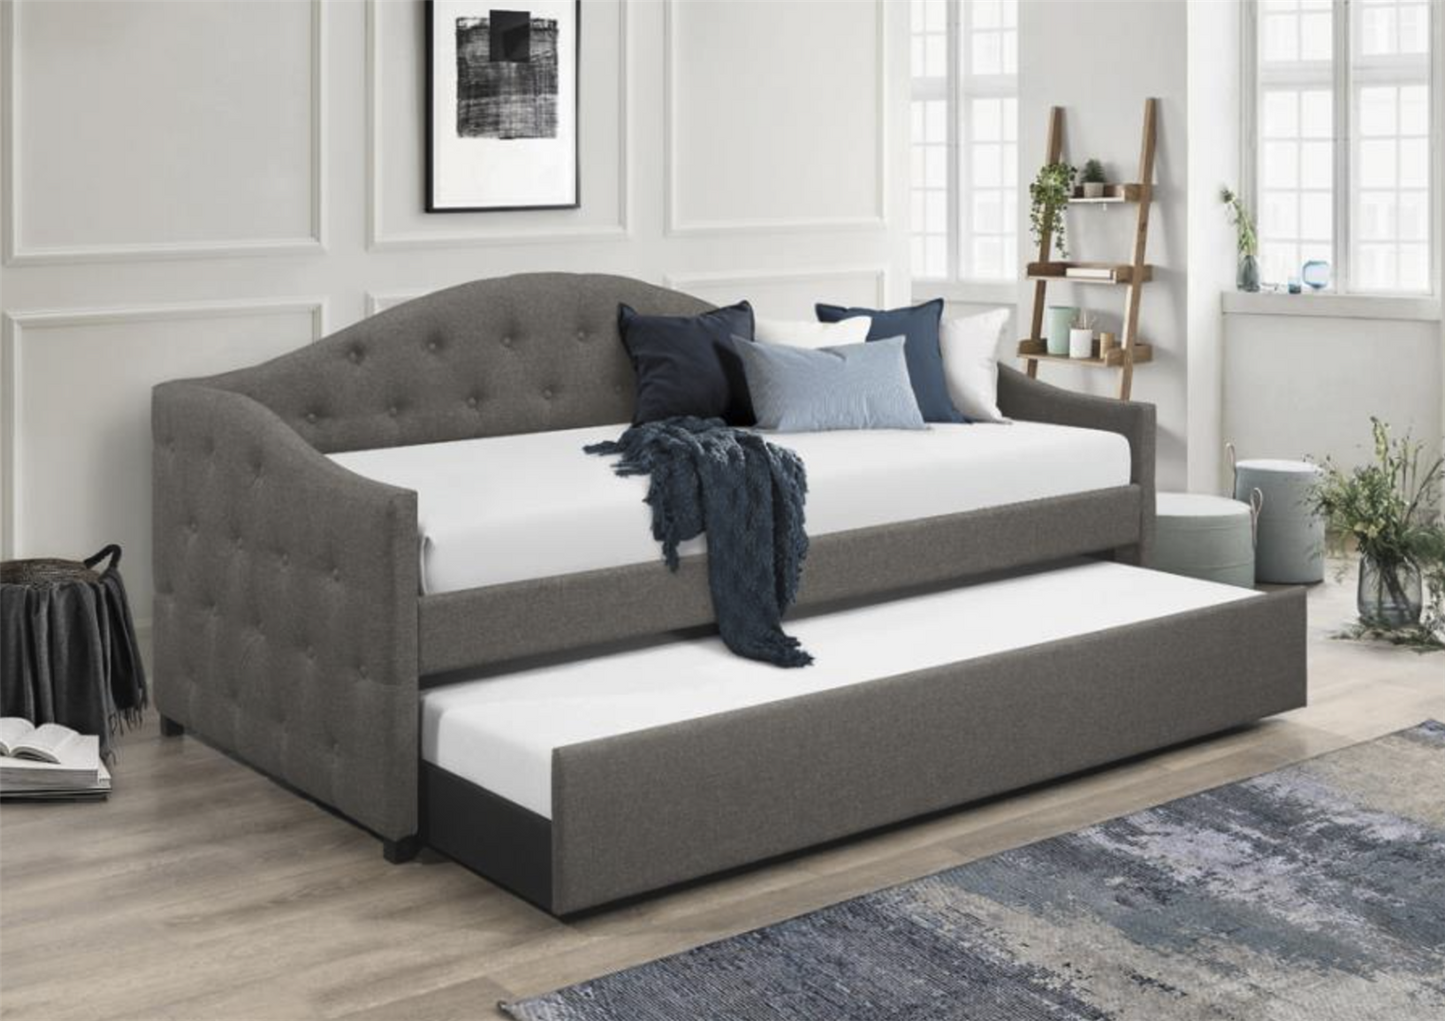 Sadie Camelback Daybed & Trundle in Gray Woven Fabric